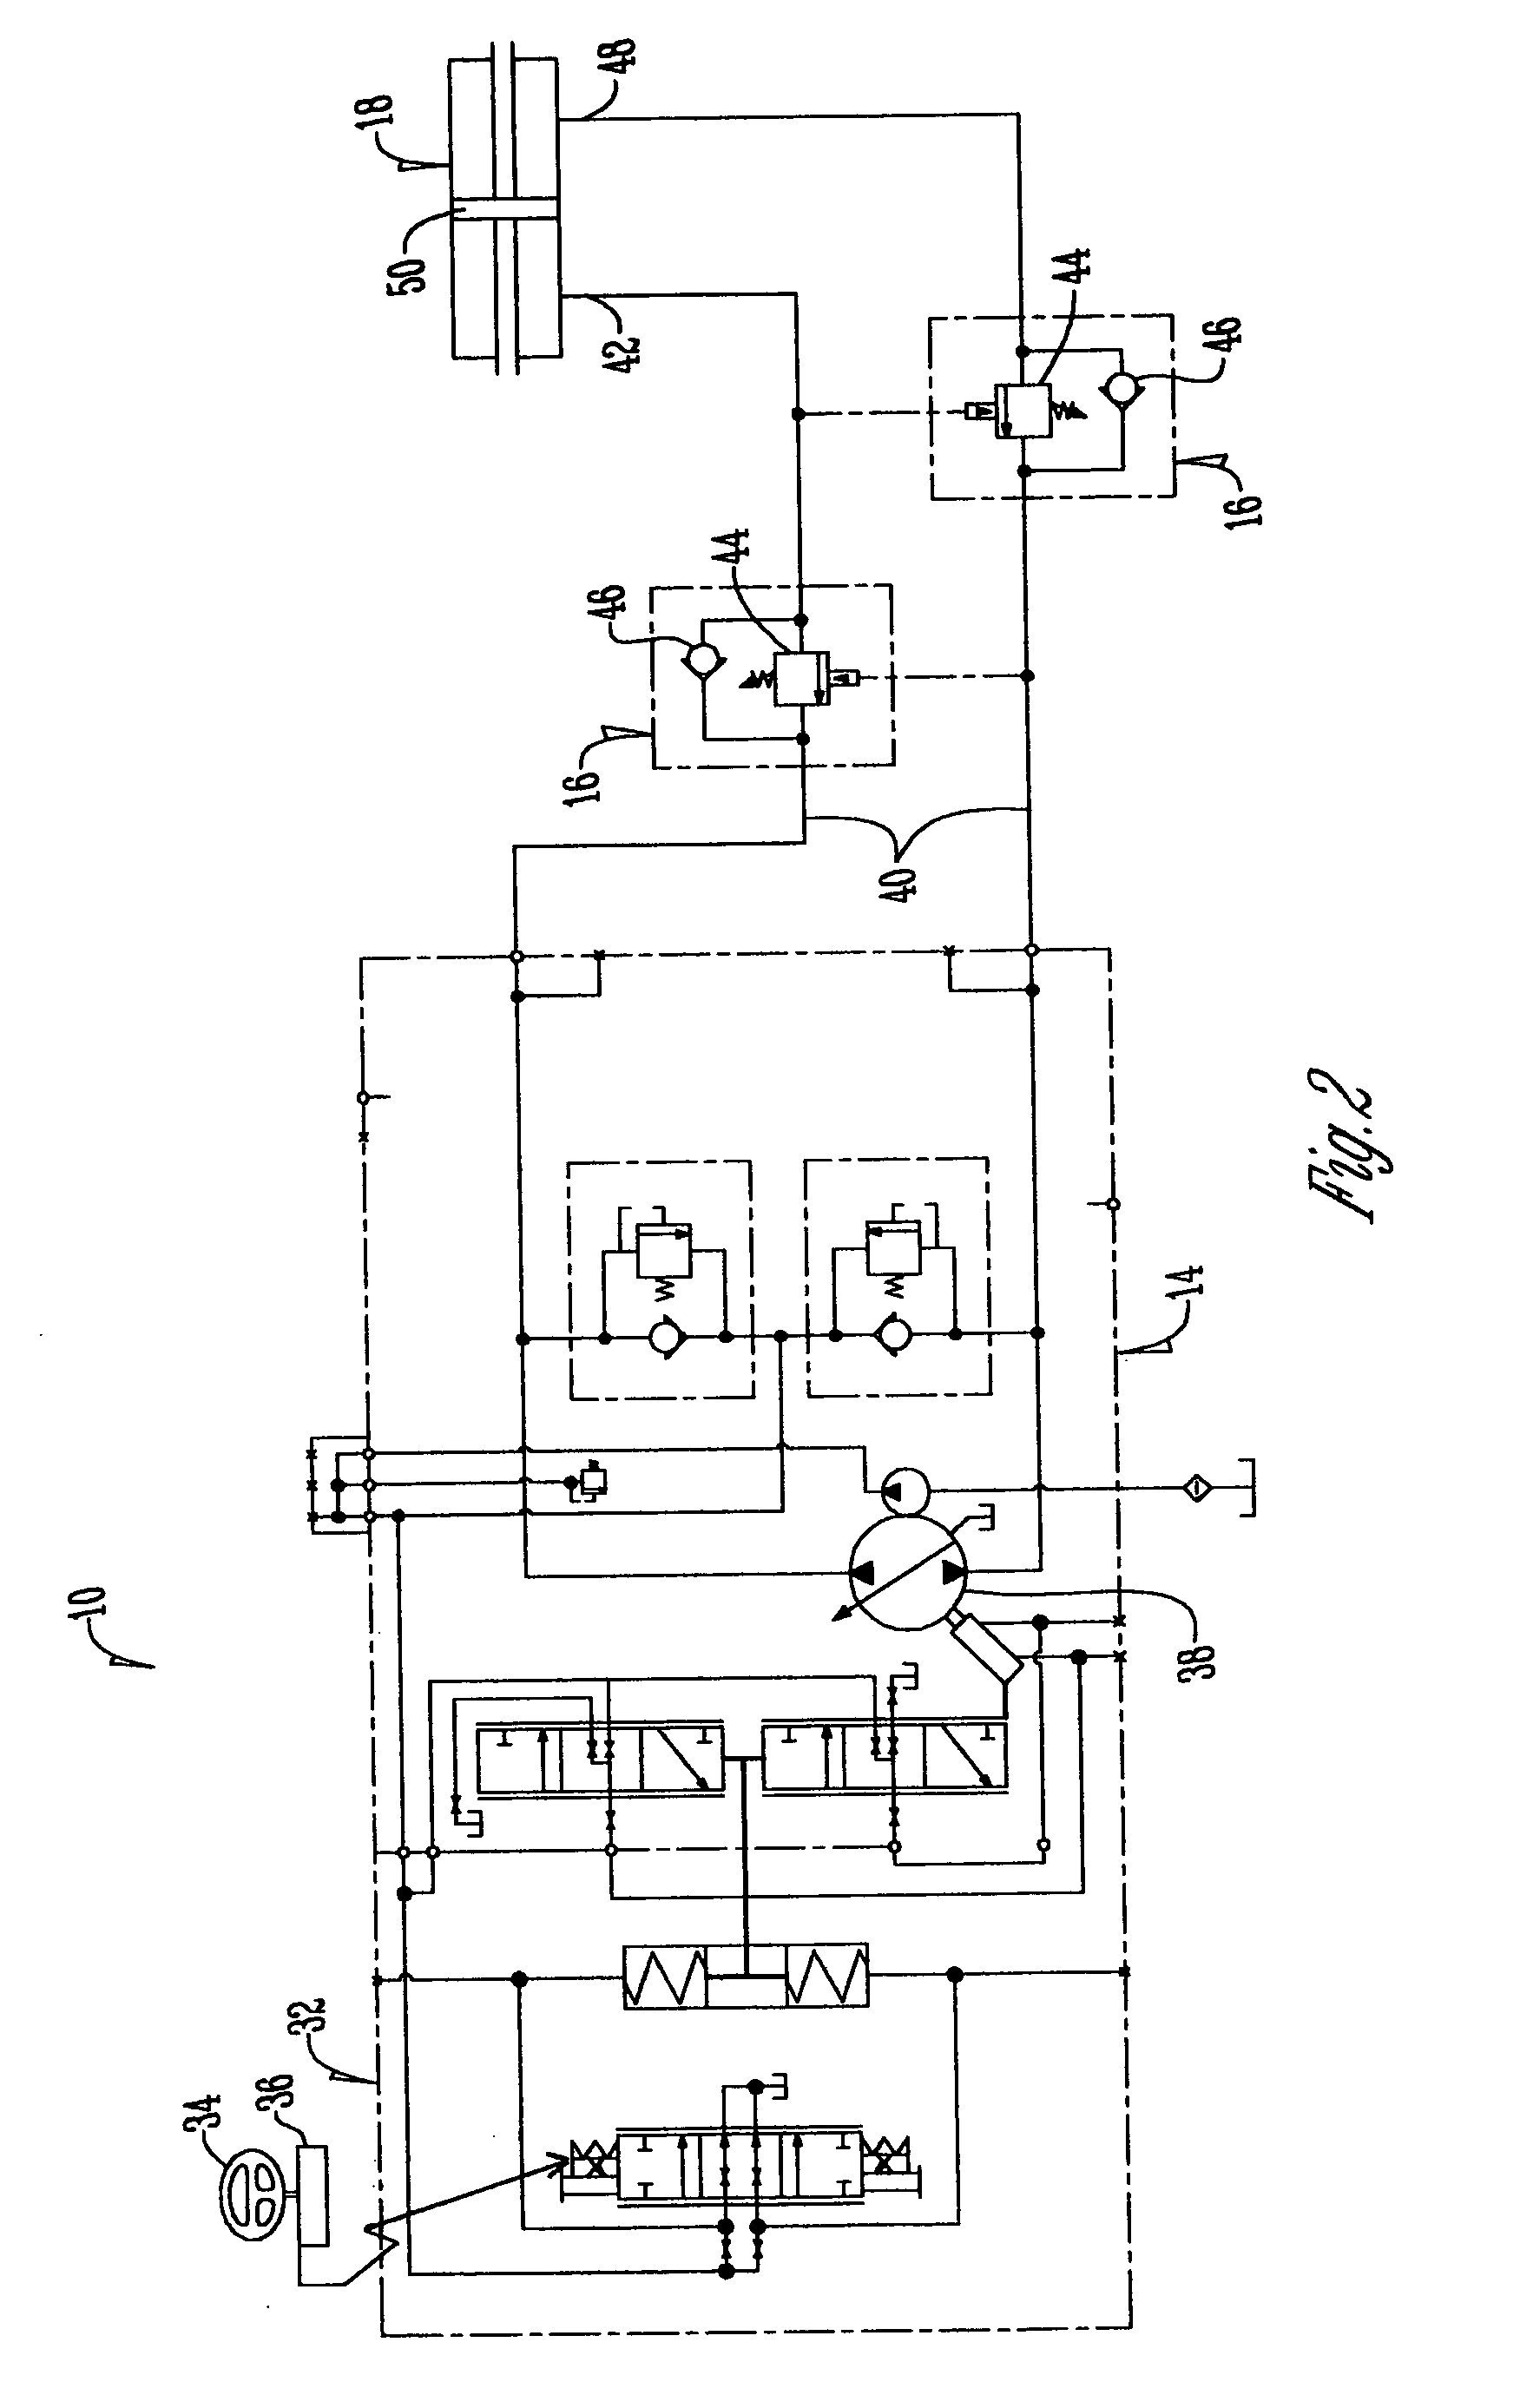 Closed circuit steering circuit for mobile vehicles